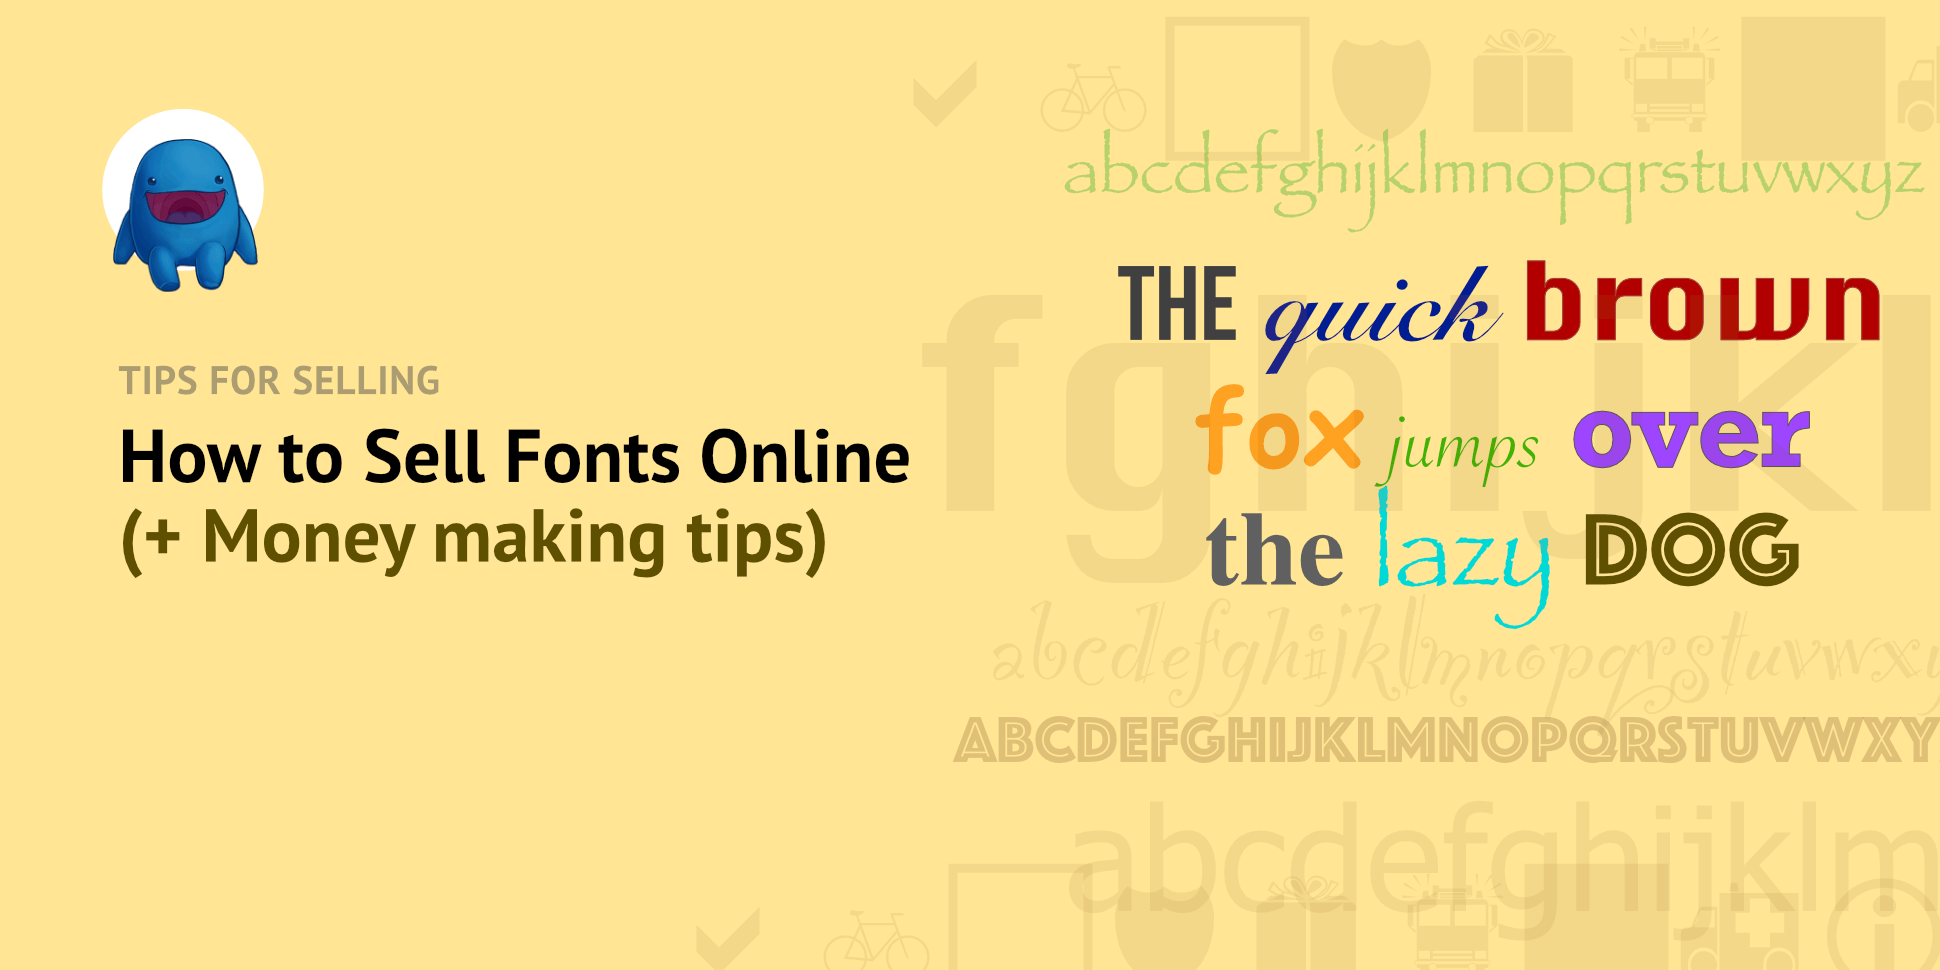 How to Sell Fonts Online (+ Money Making Tips)